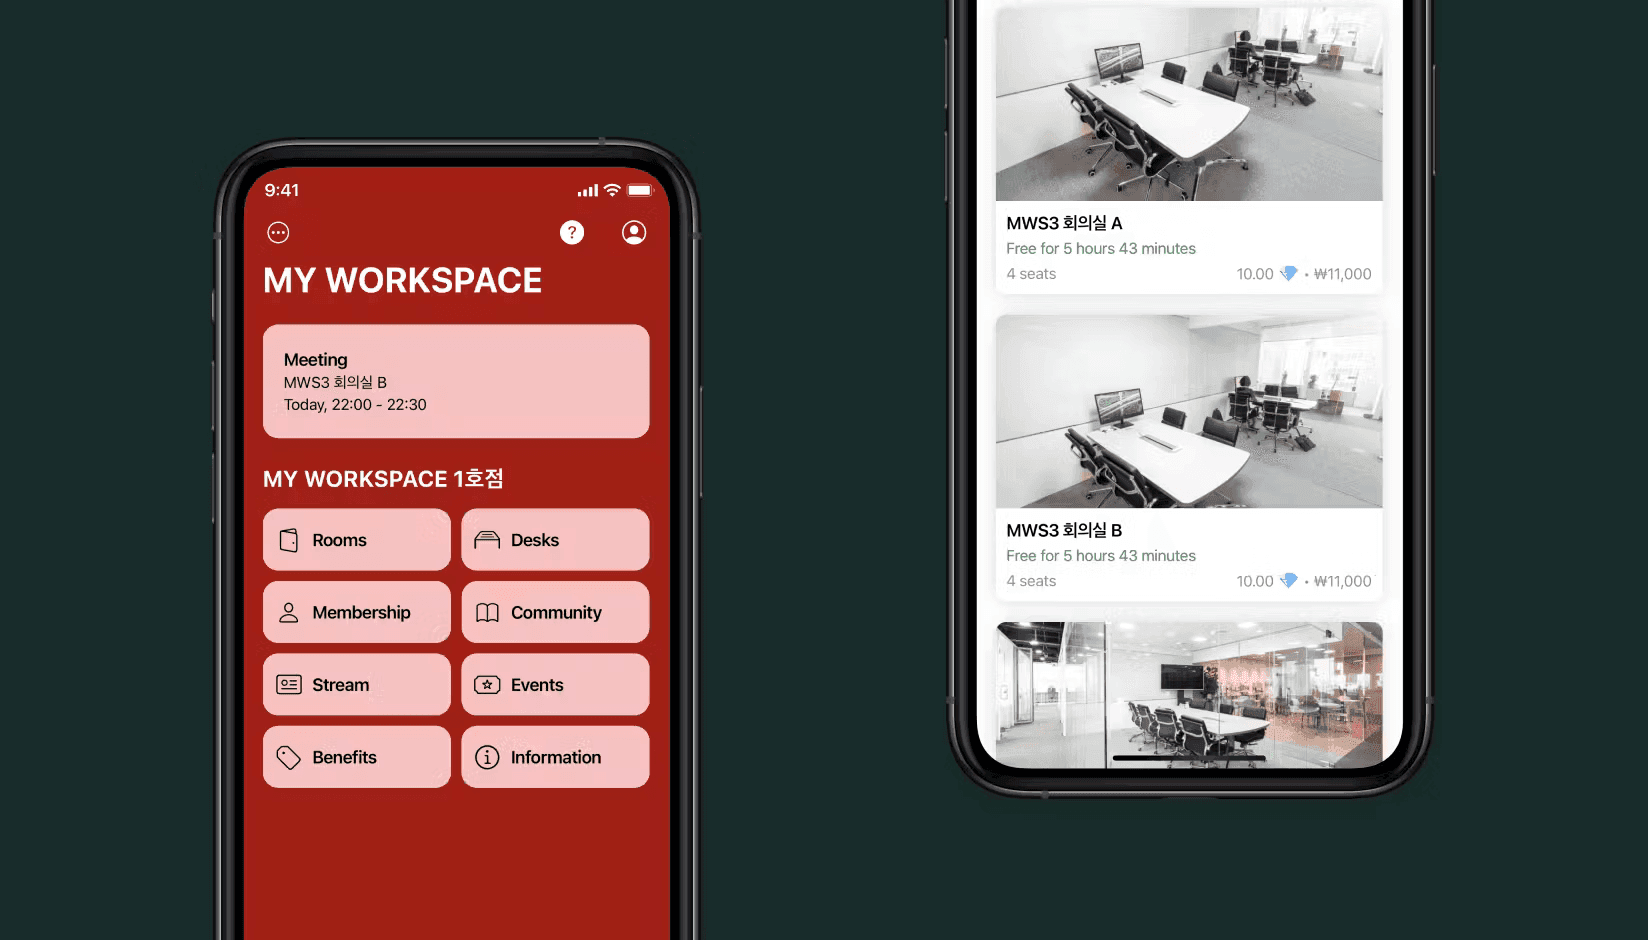 MY WORKSPACE app developed by Spacebring